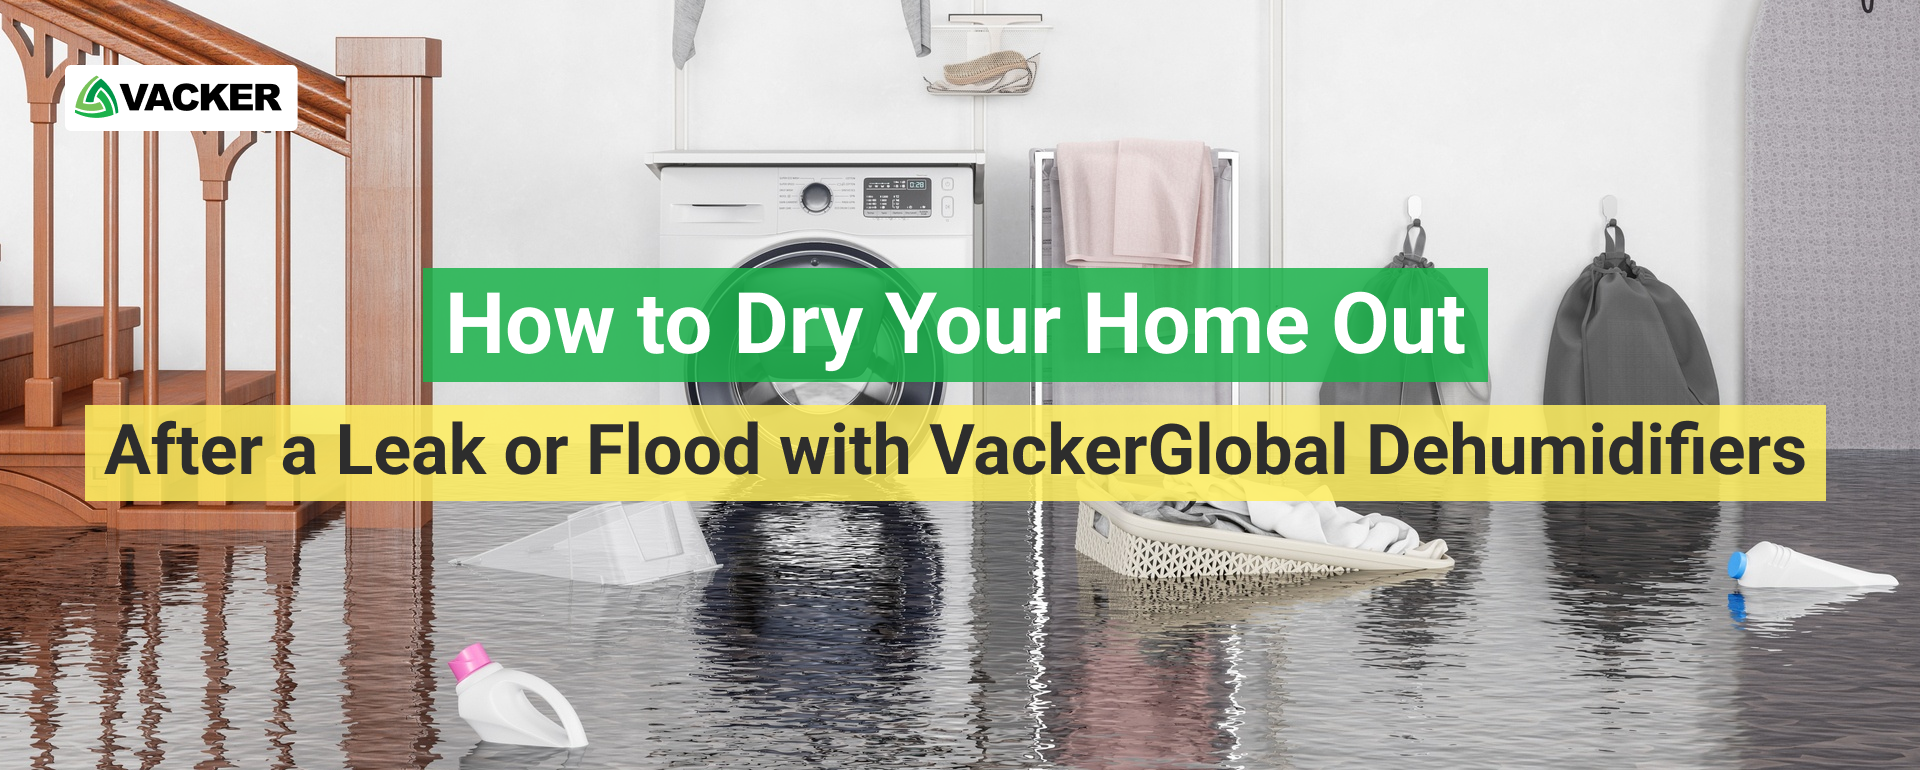 How to Dry Your Home Out After a Leak or Flood with VackerGlobal Dehumidifiers